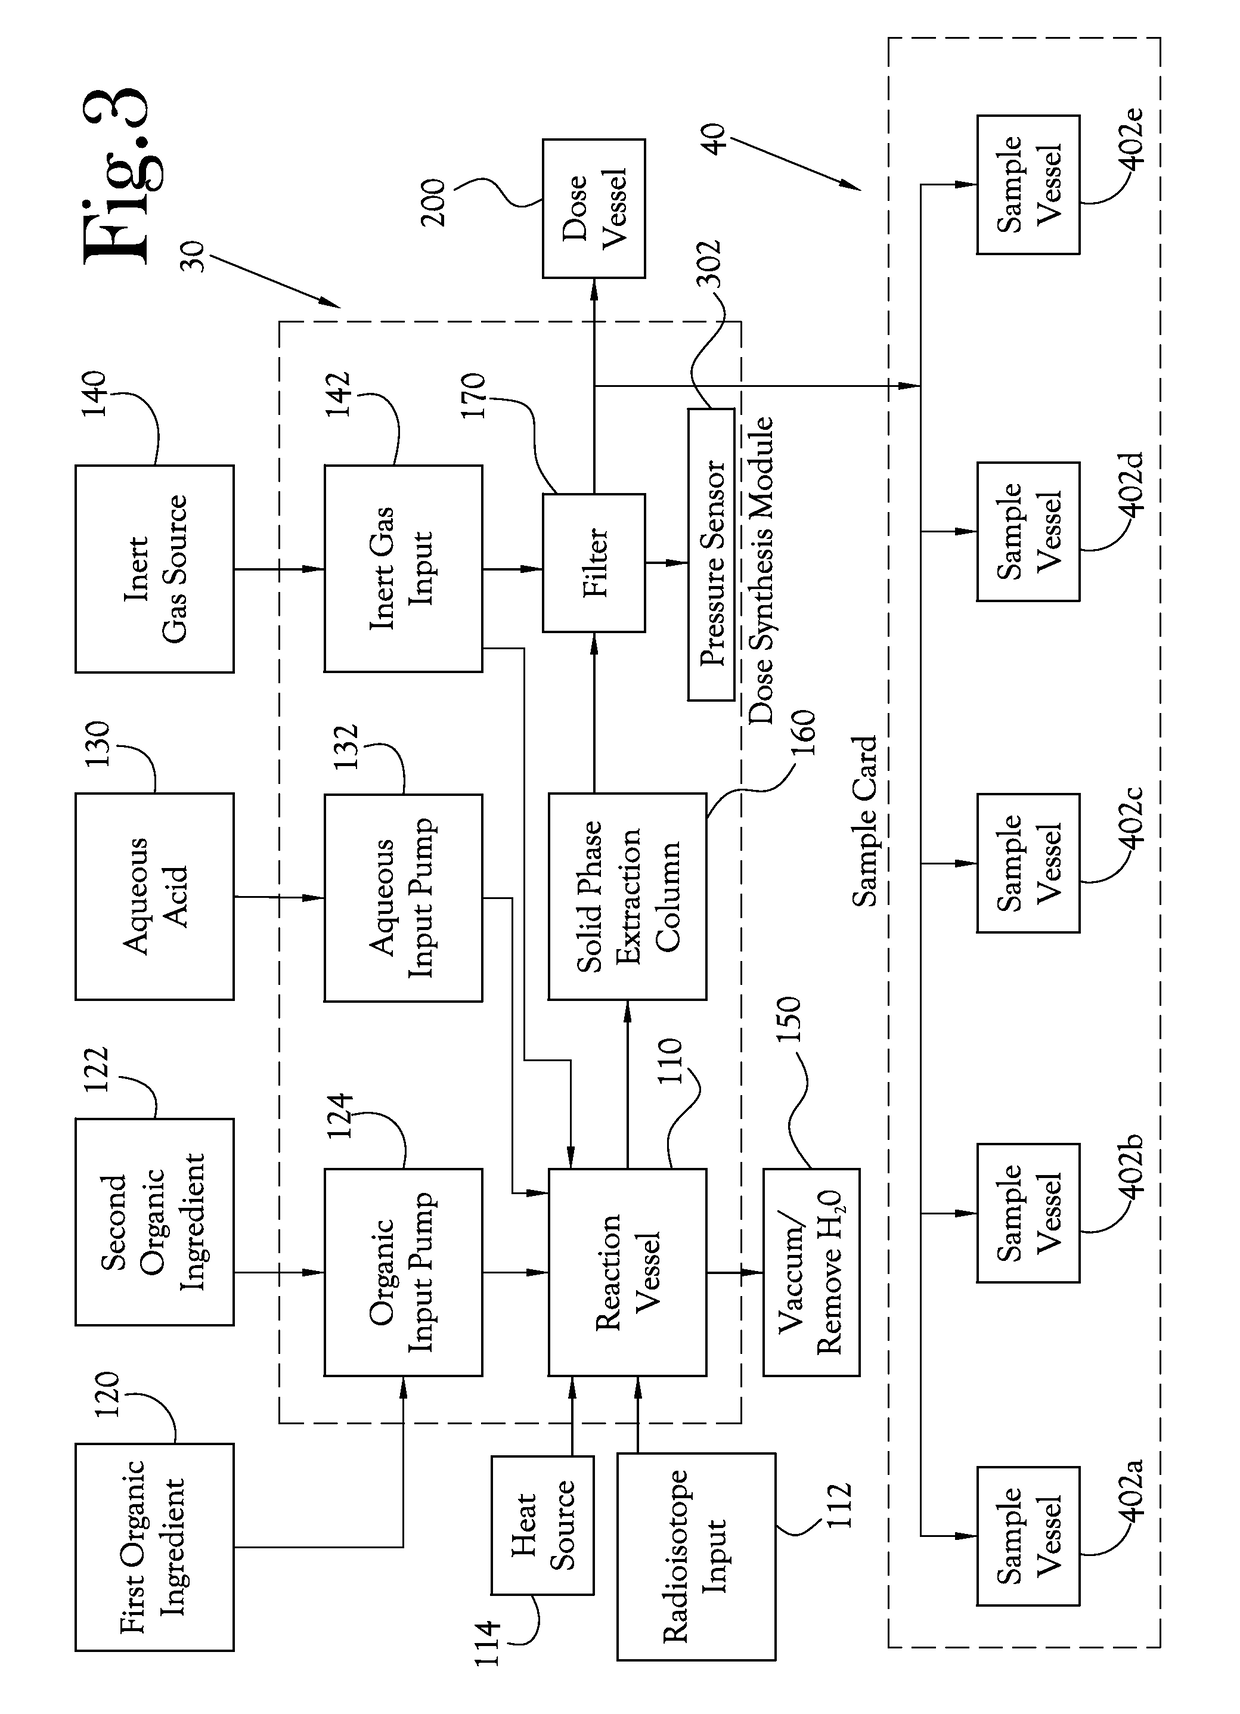 Dose synthesis card for use with automated biomarker production system